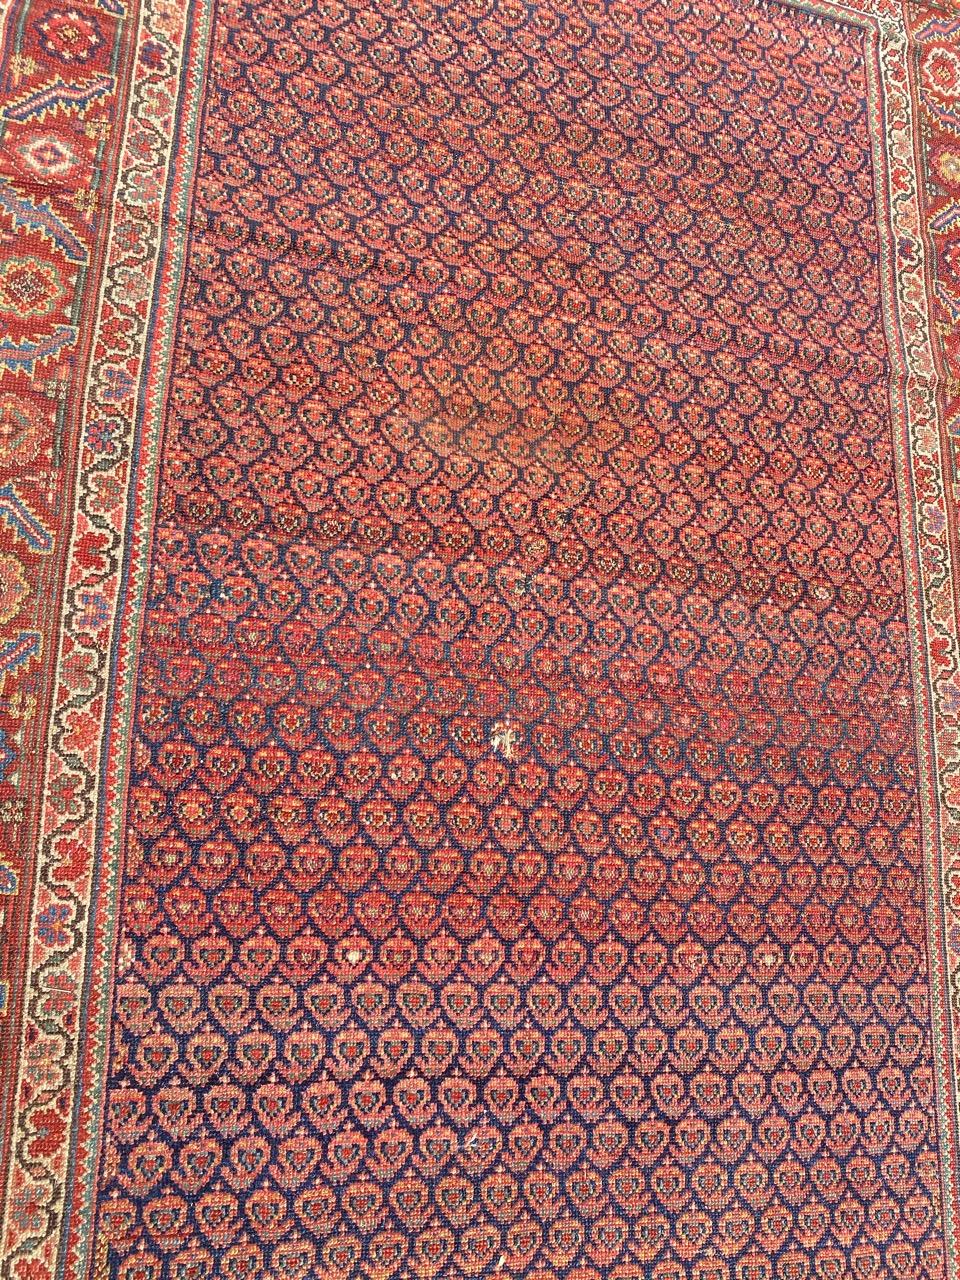 Asian Wonderful Antique Malayer Runner For Sale